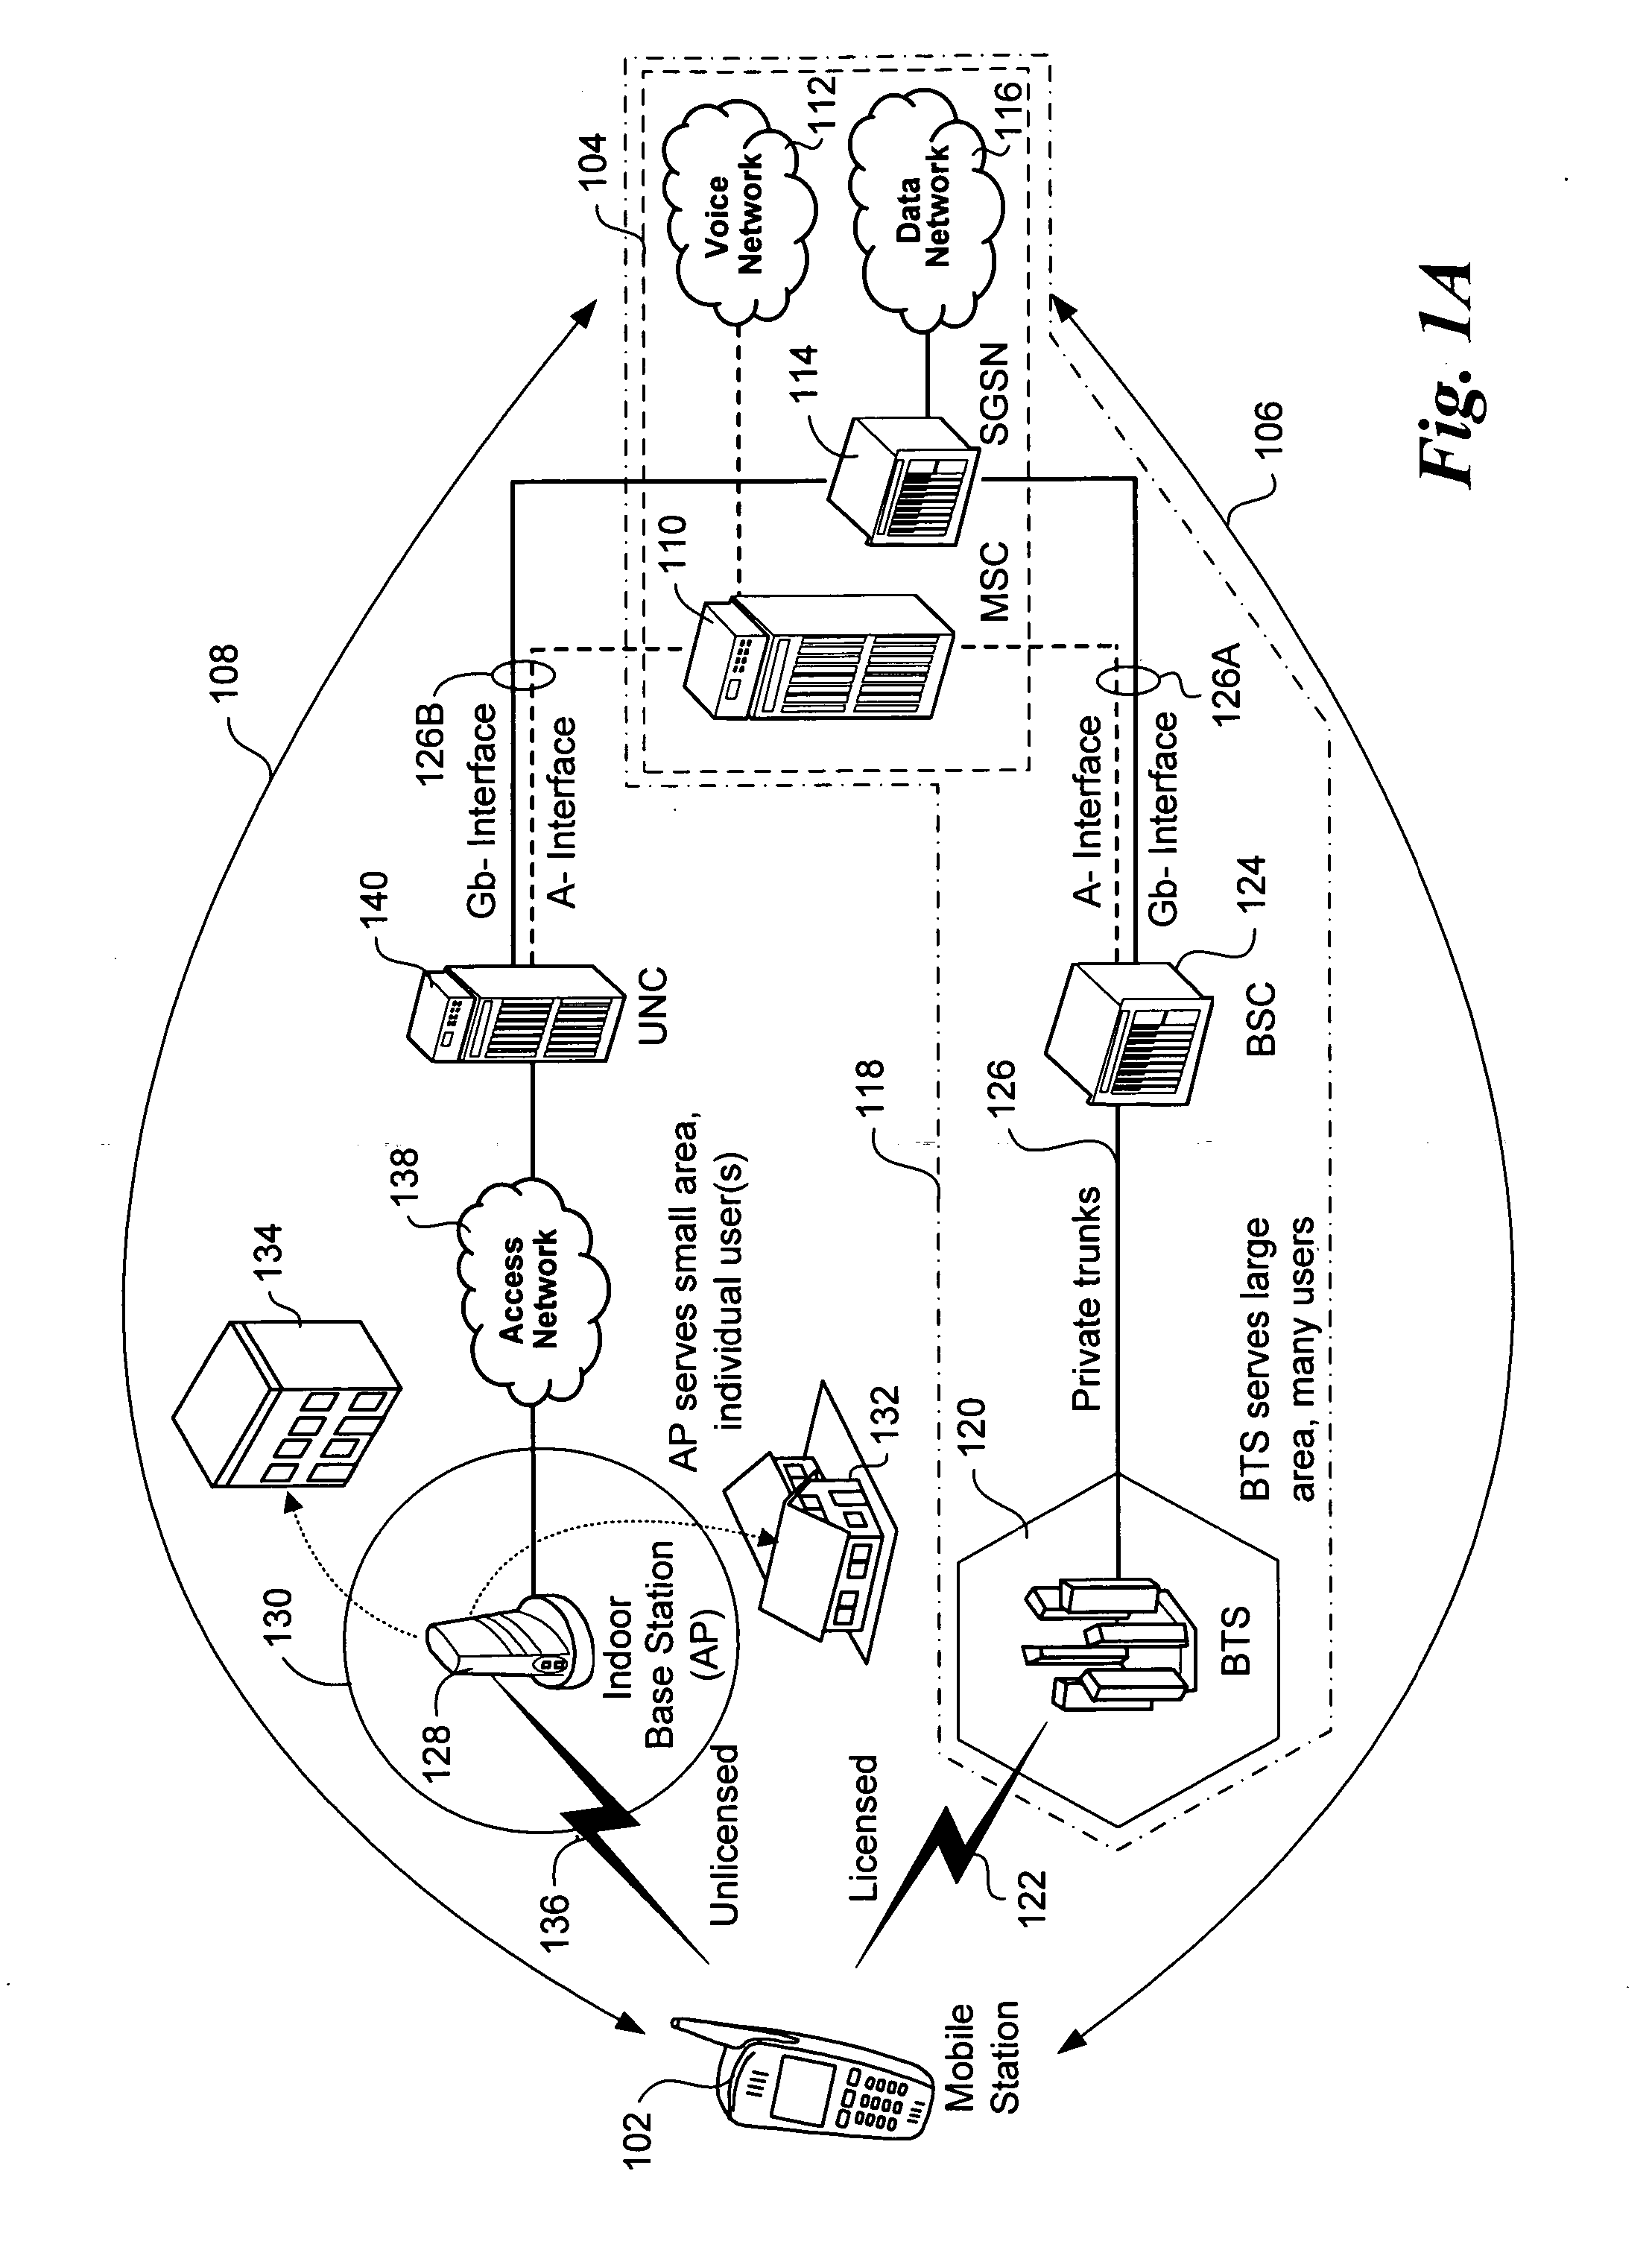 Handover messaging in an unlicensed mobile access telecommunications system